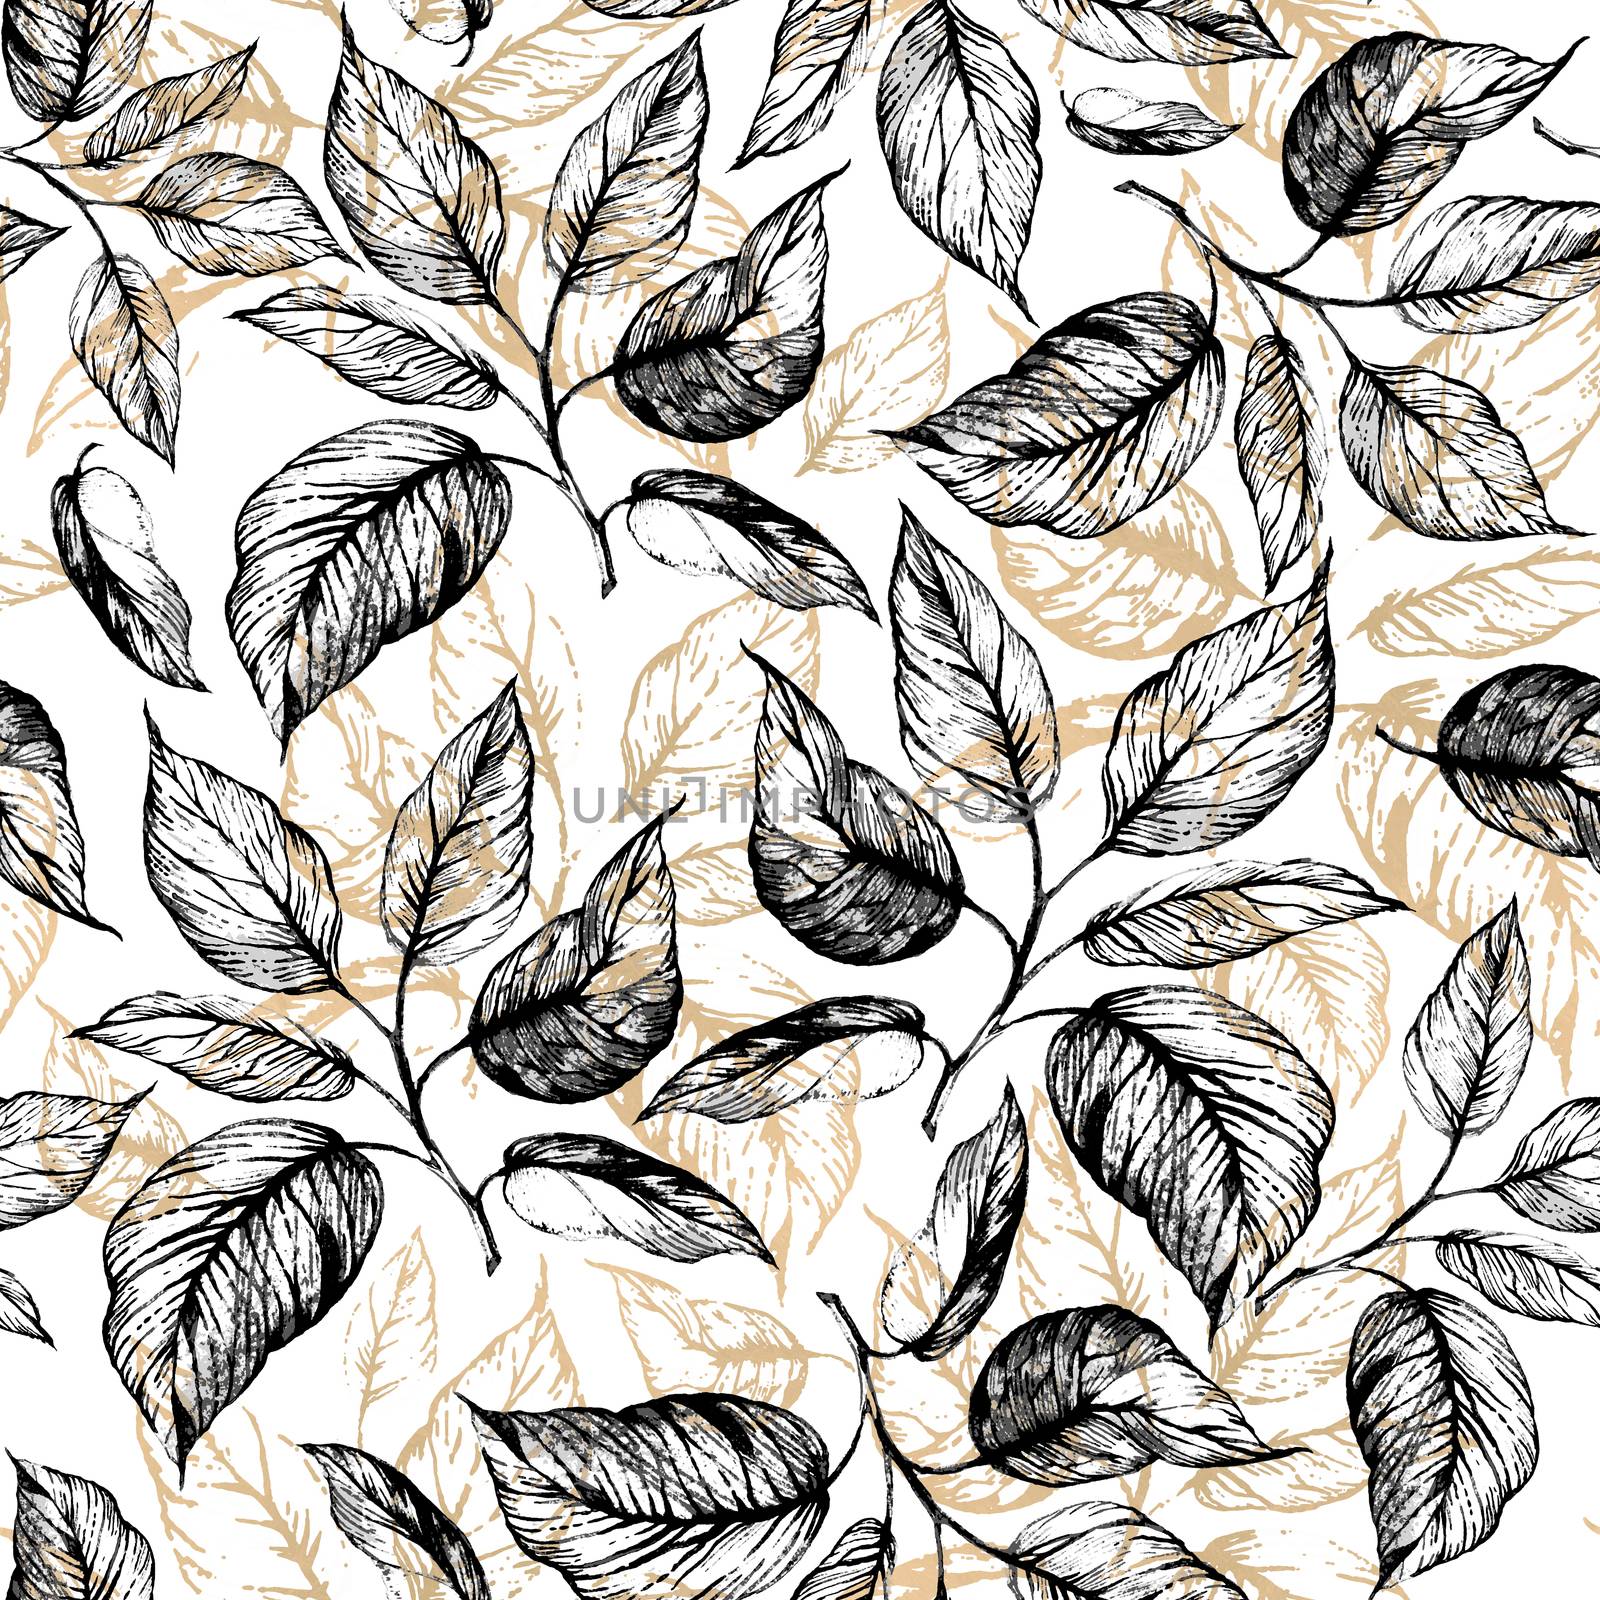 Seamless pattern - Hand drawn twig with leaves in gray scale and leaves contour of golden foil on white. Design for wallpaper, textile, fabric, bookend, wrapping.